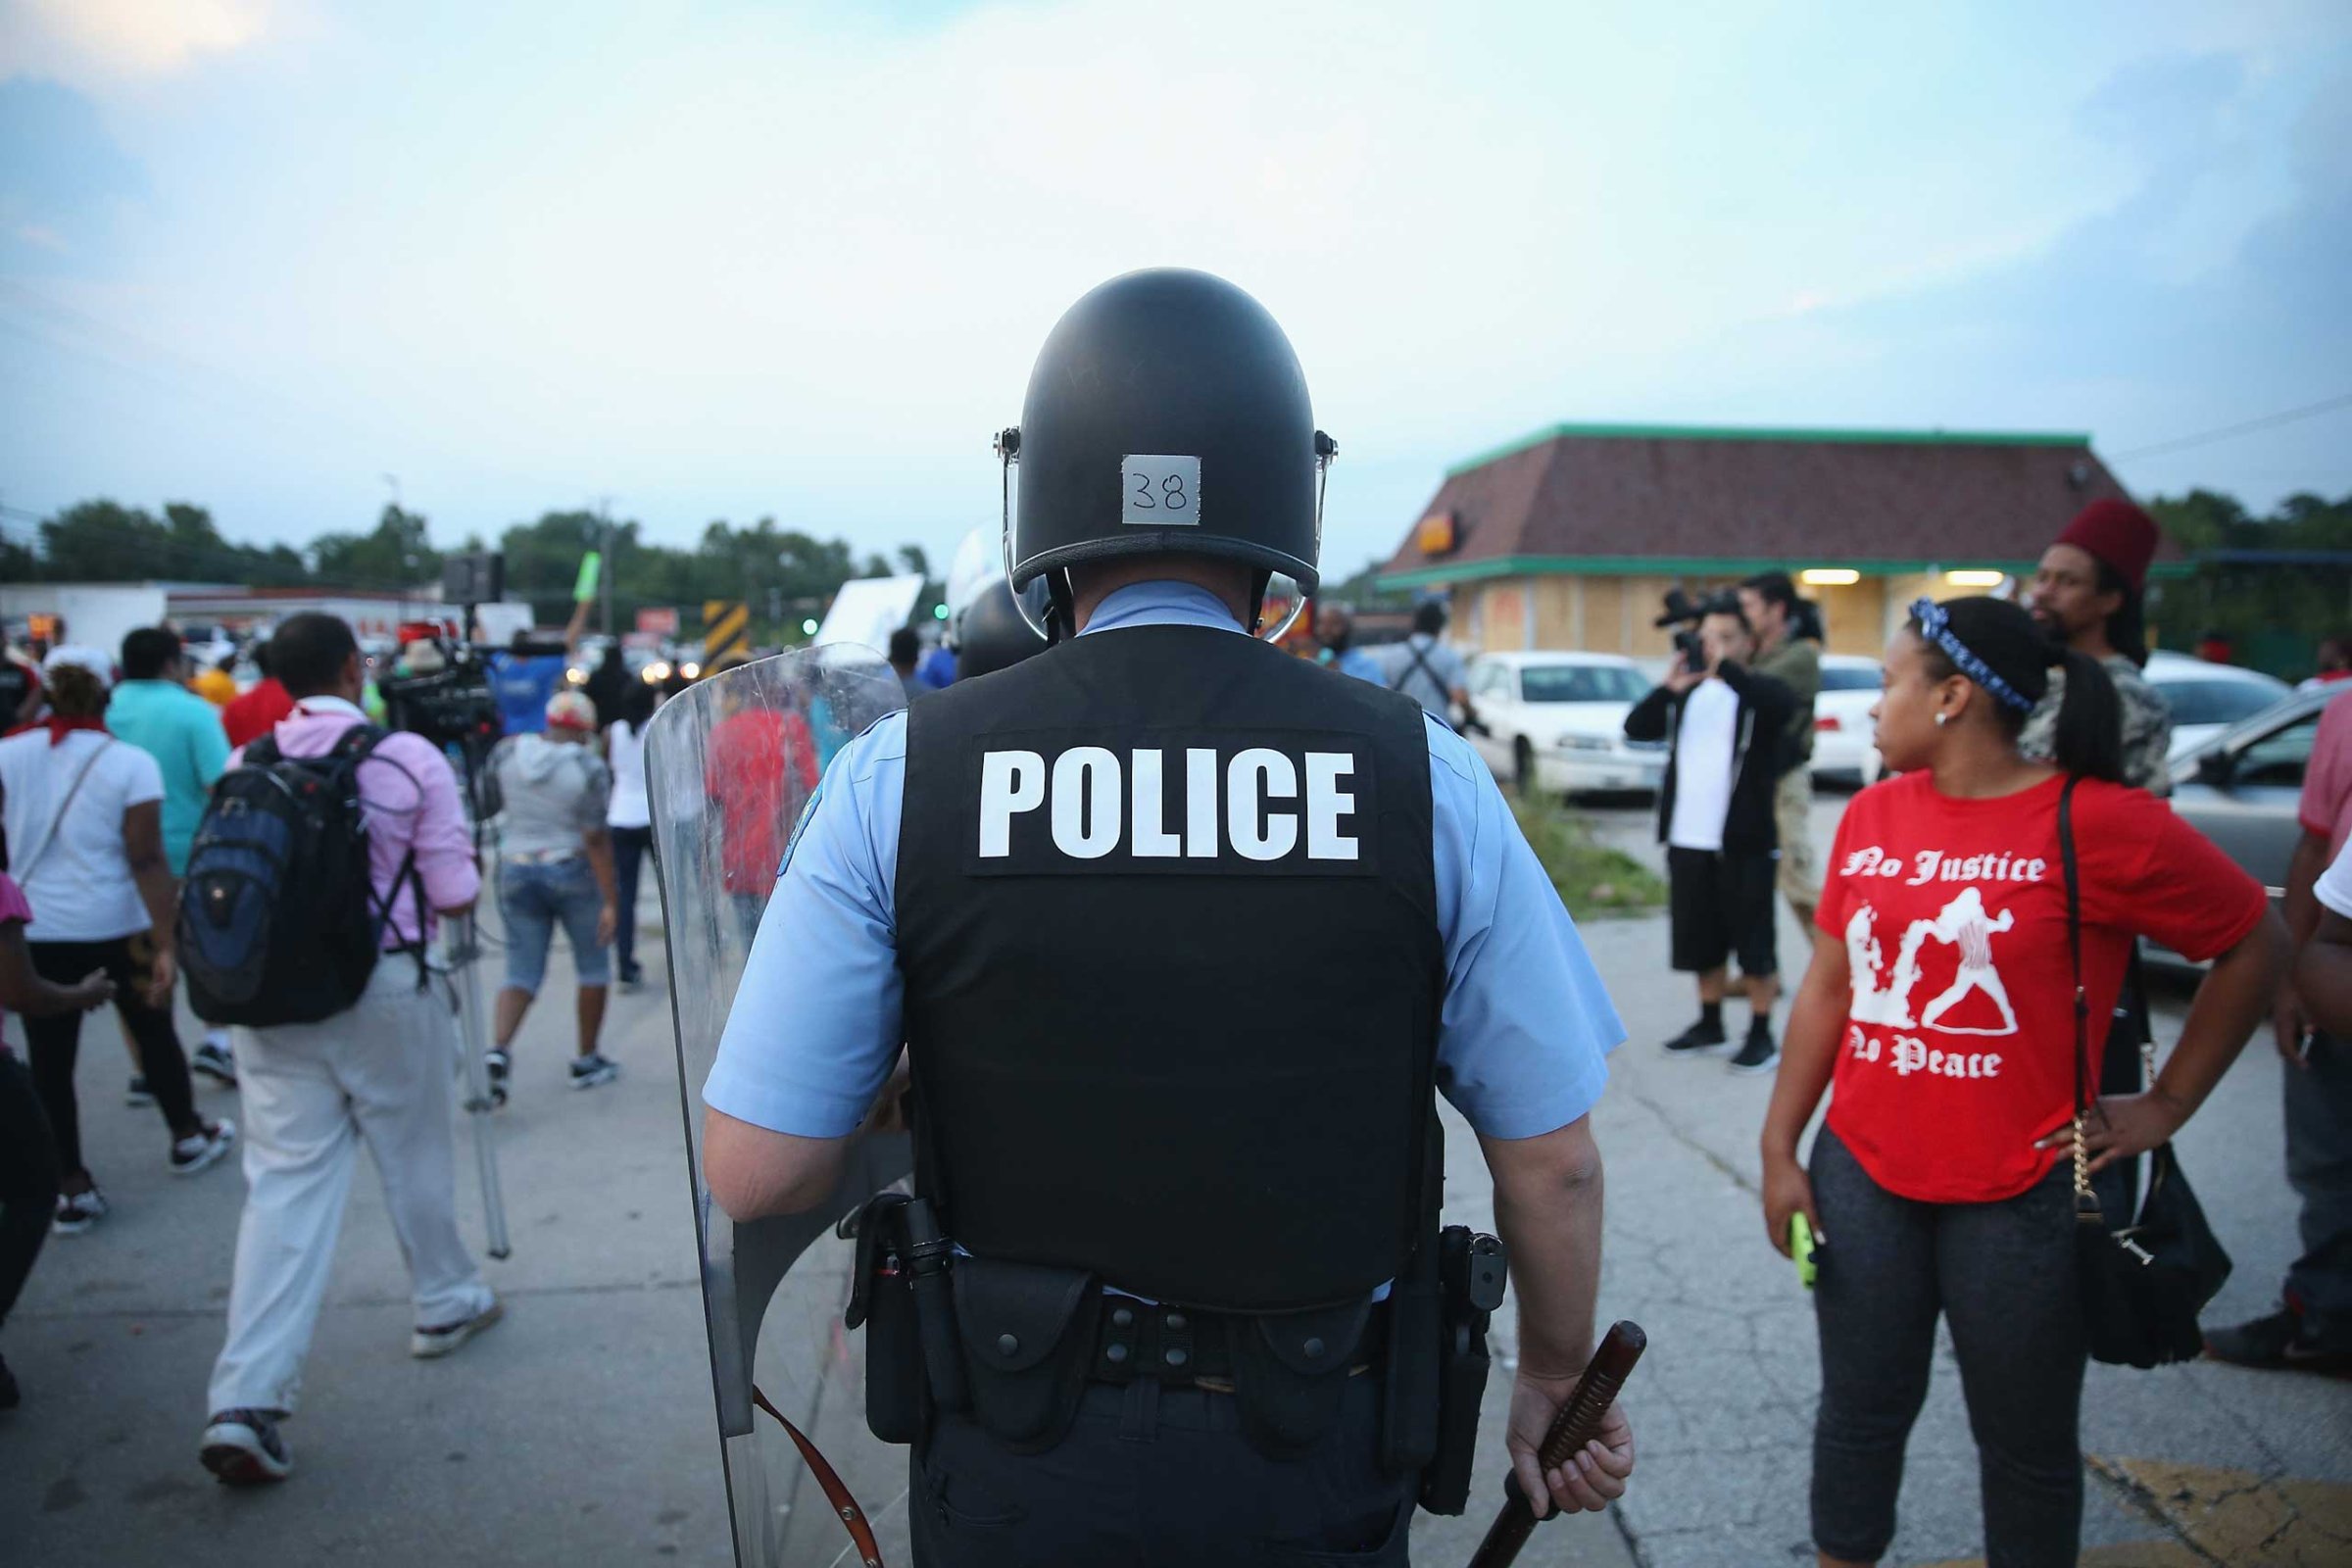 Police are deployed to keep peace along Florissant Avenue in Ferguson, Mo. on Aug. 16, 2014.